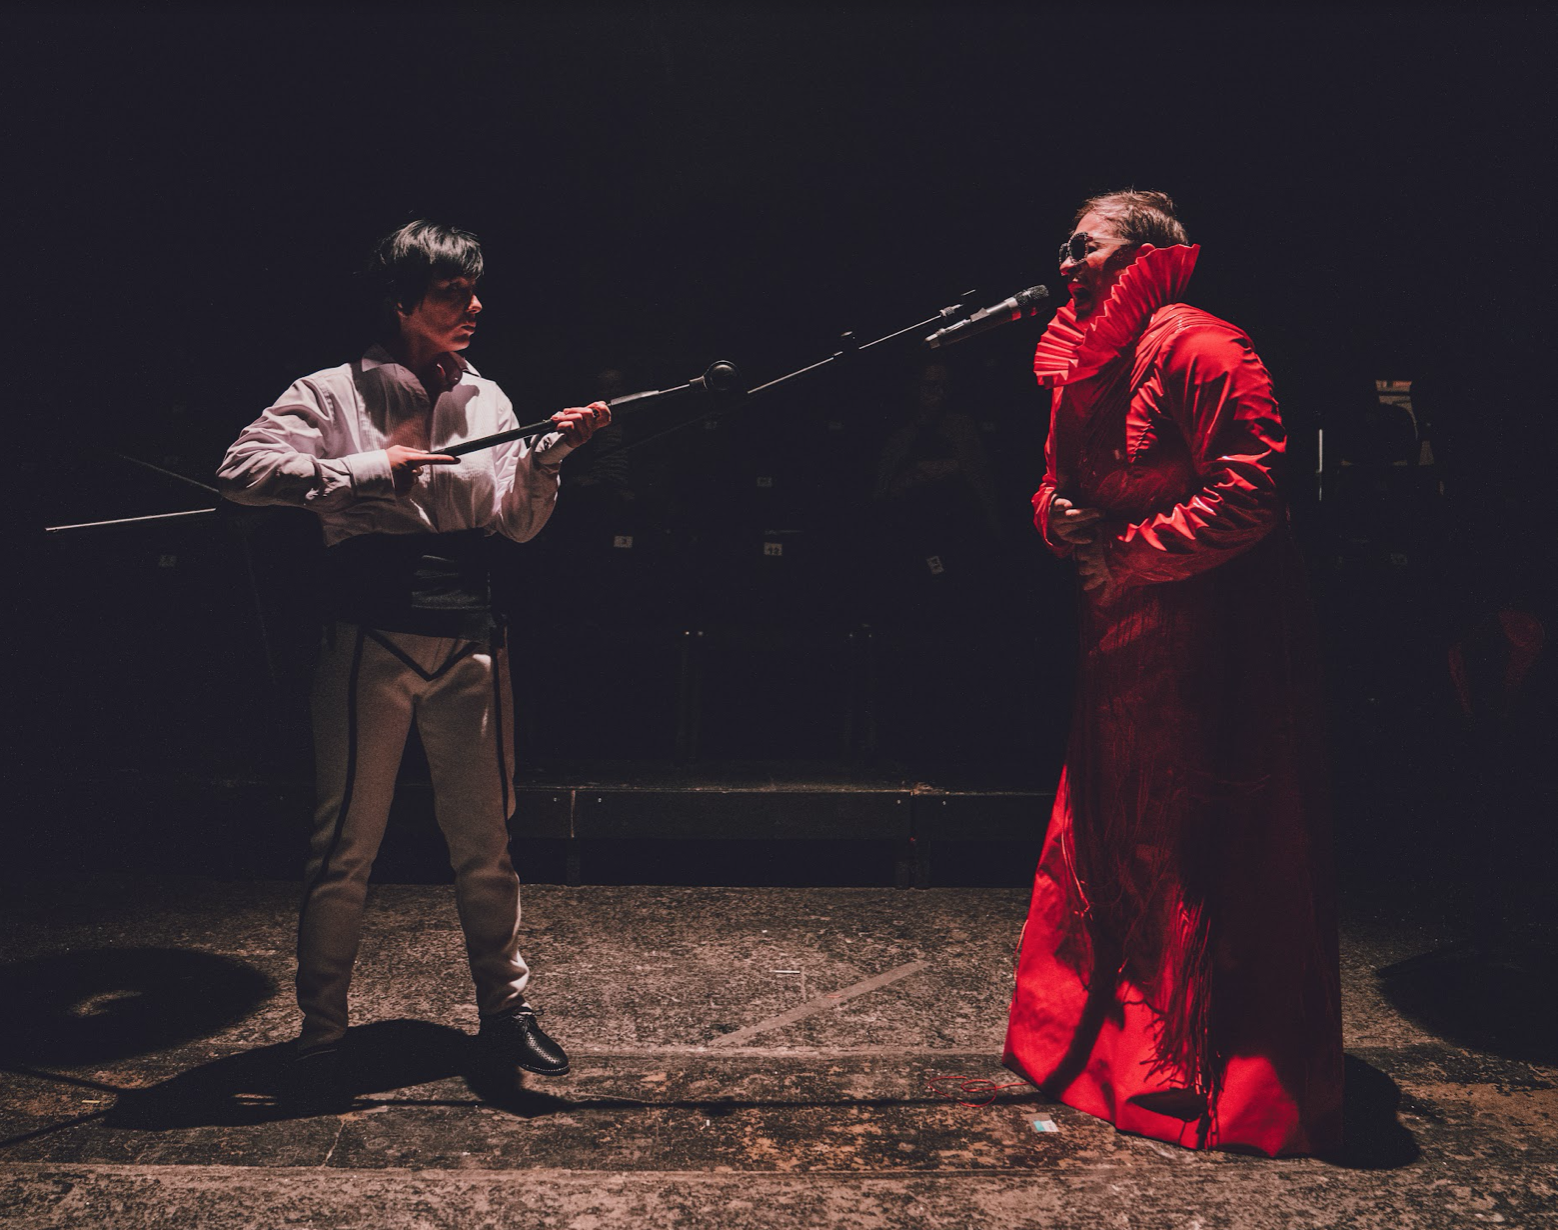 An actor dressed in white points a microphone on a long stick at another actor dressed in red.